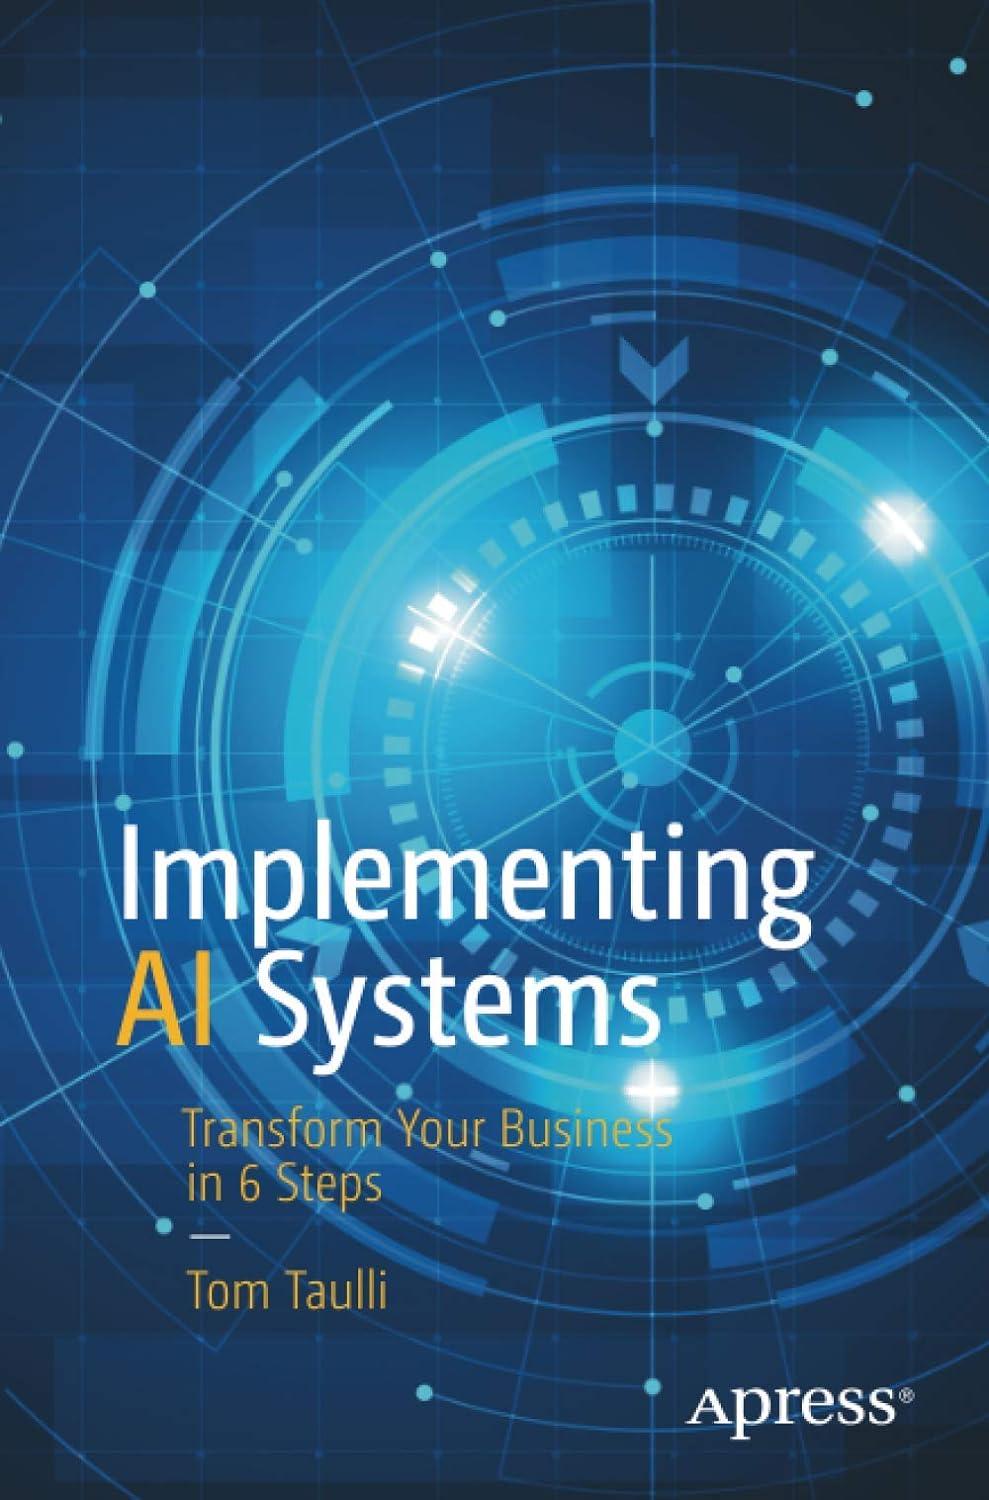 Implementing AI Systems Transform Your Business In 6 Steps